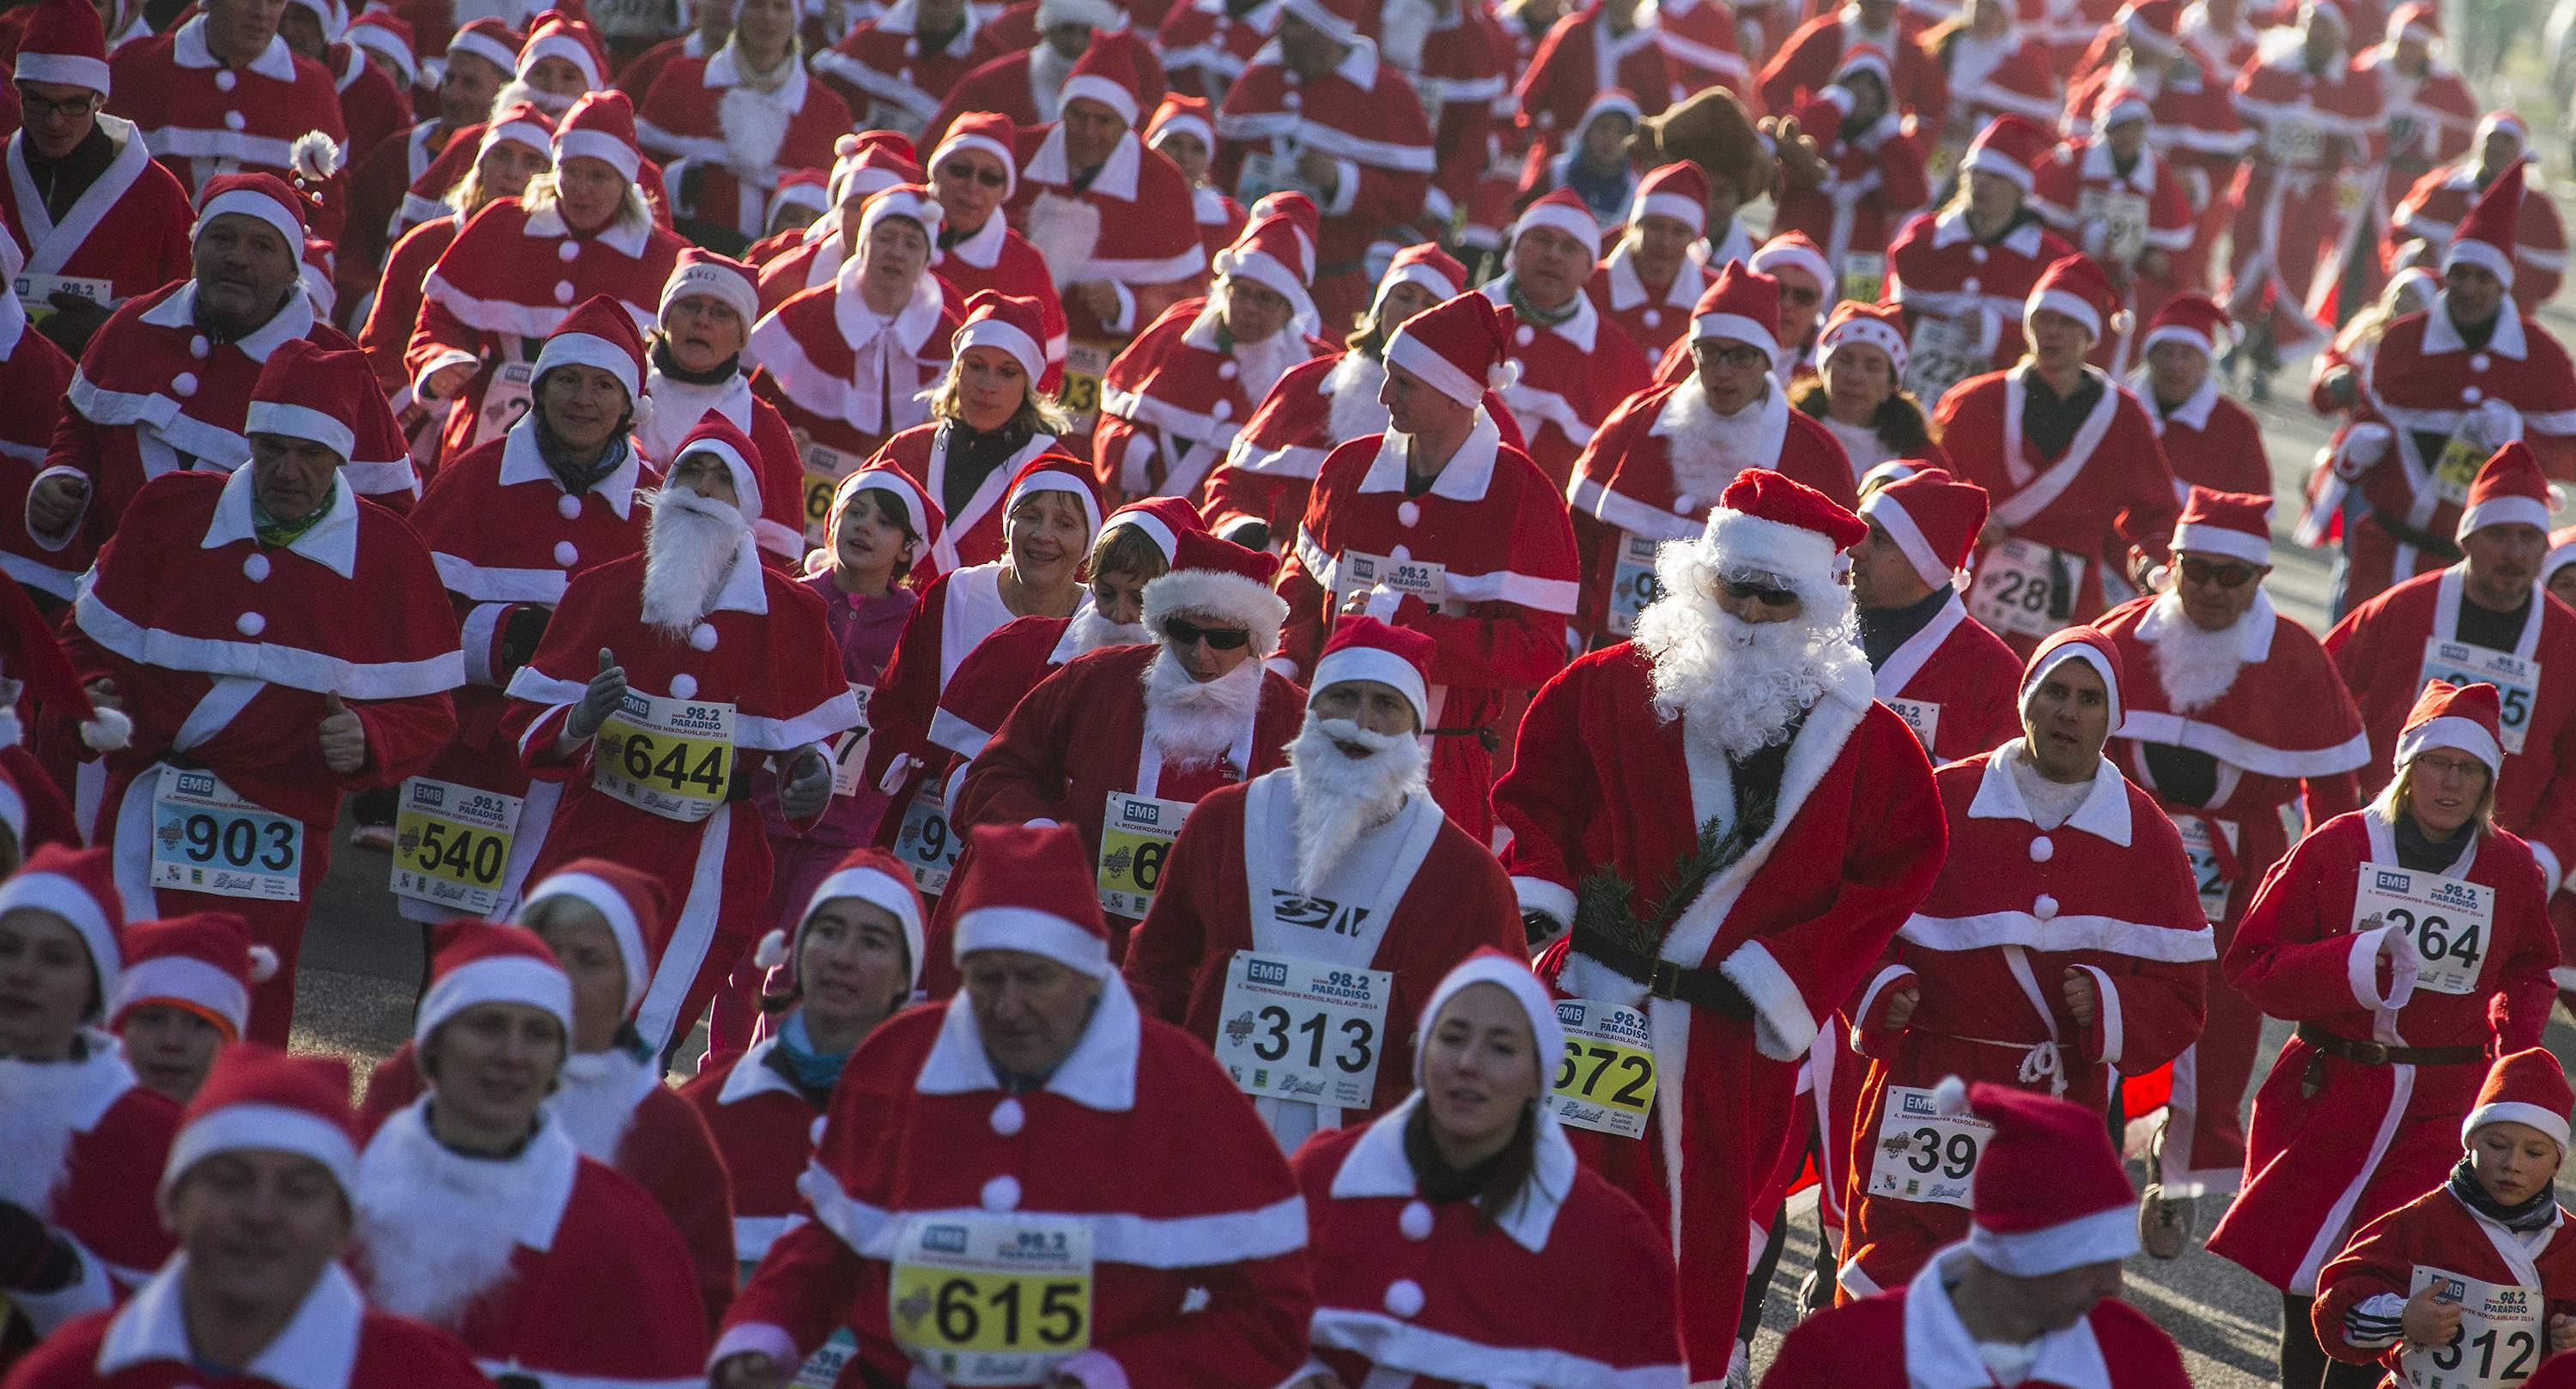 Runners dressed as Father Christmas start in the Nikolaus Lauf (Santa Claus Run) in the east German town of Michendorf